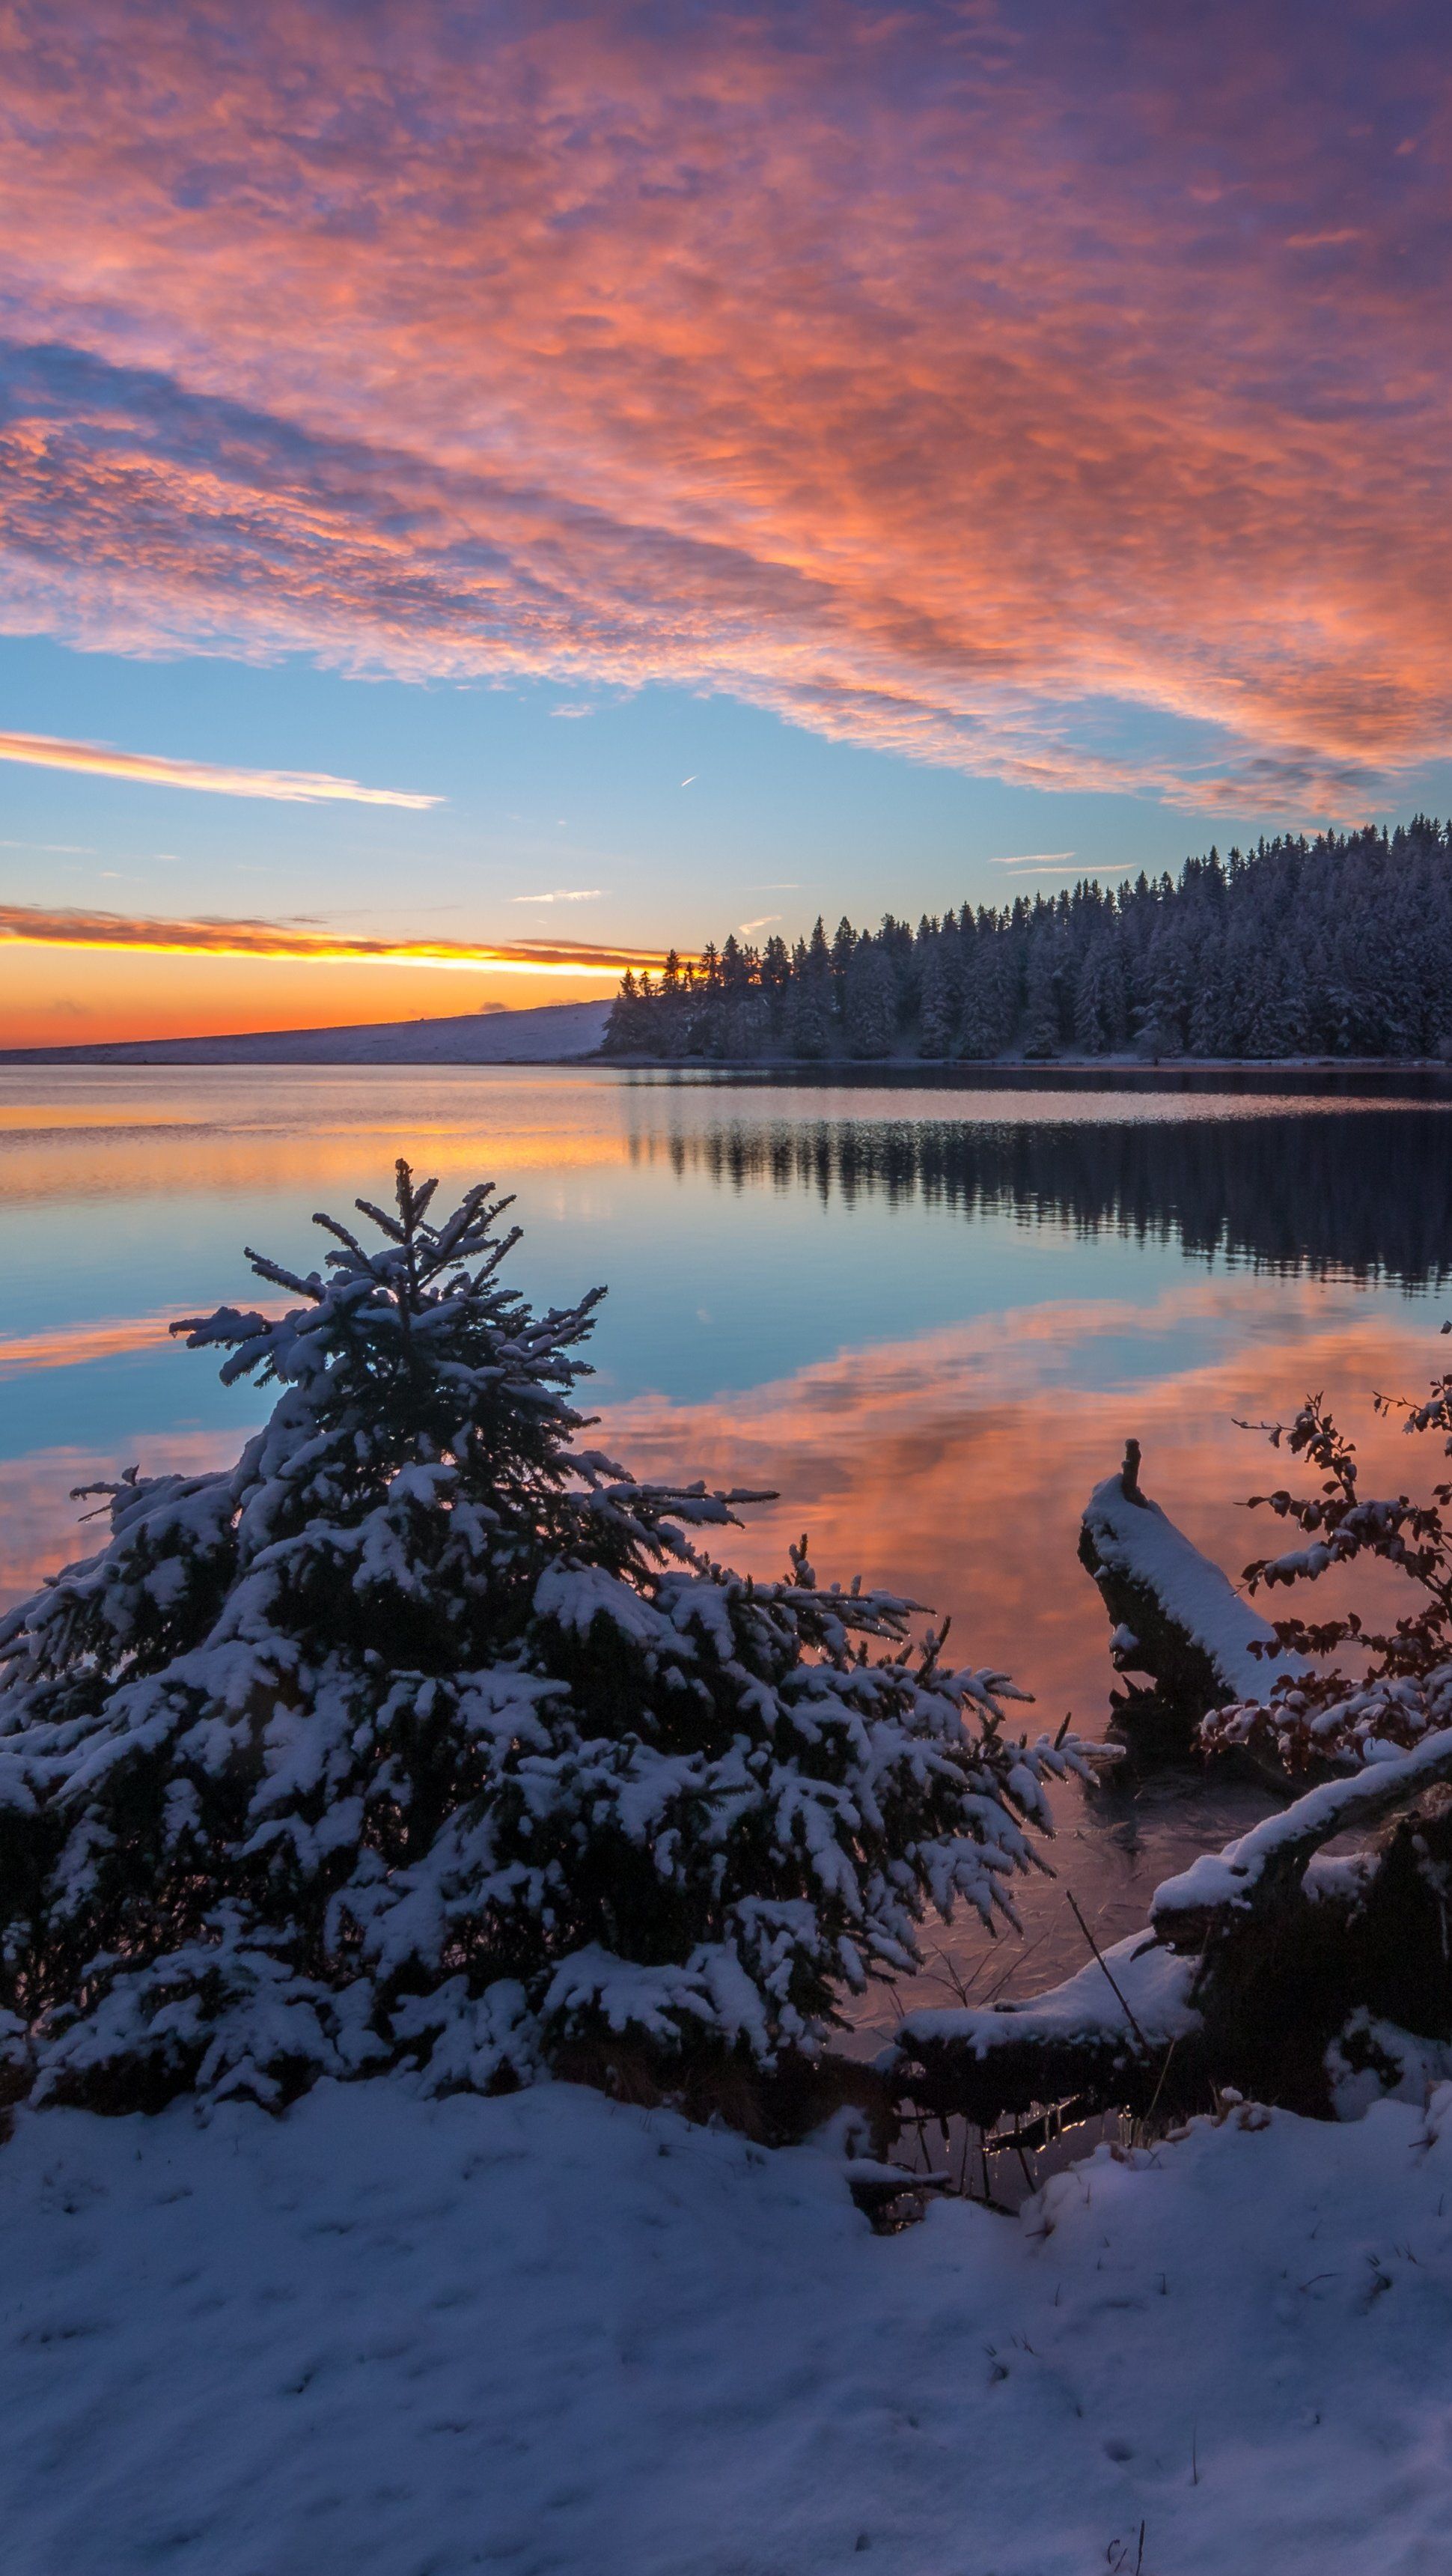 Lake in the snow at sunset Wallpaper